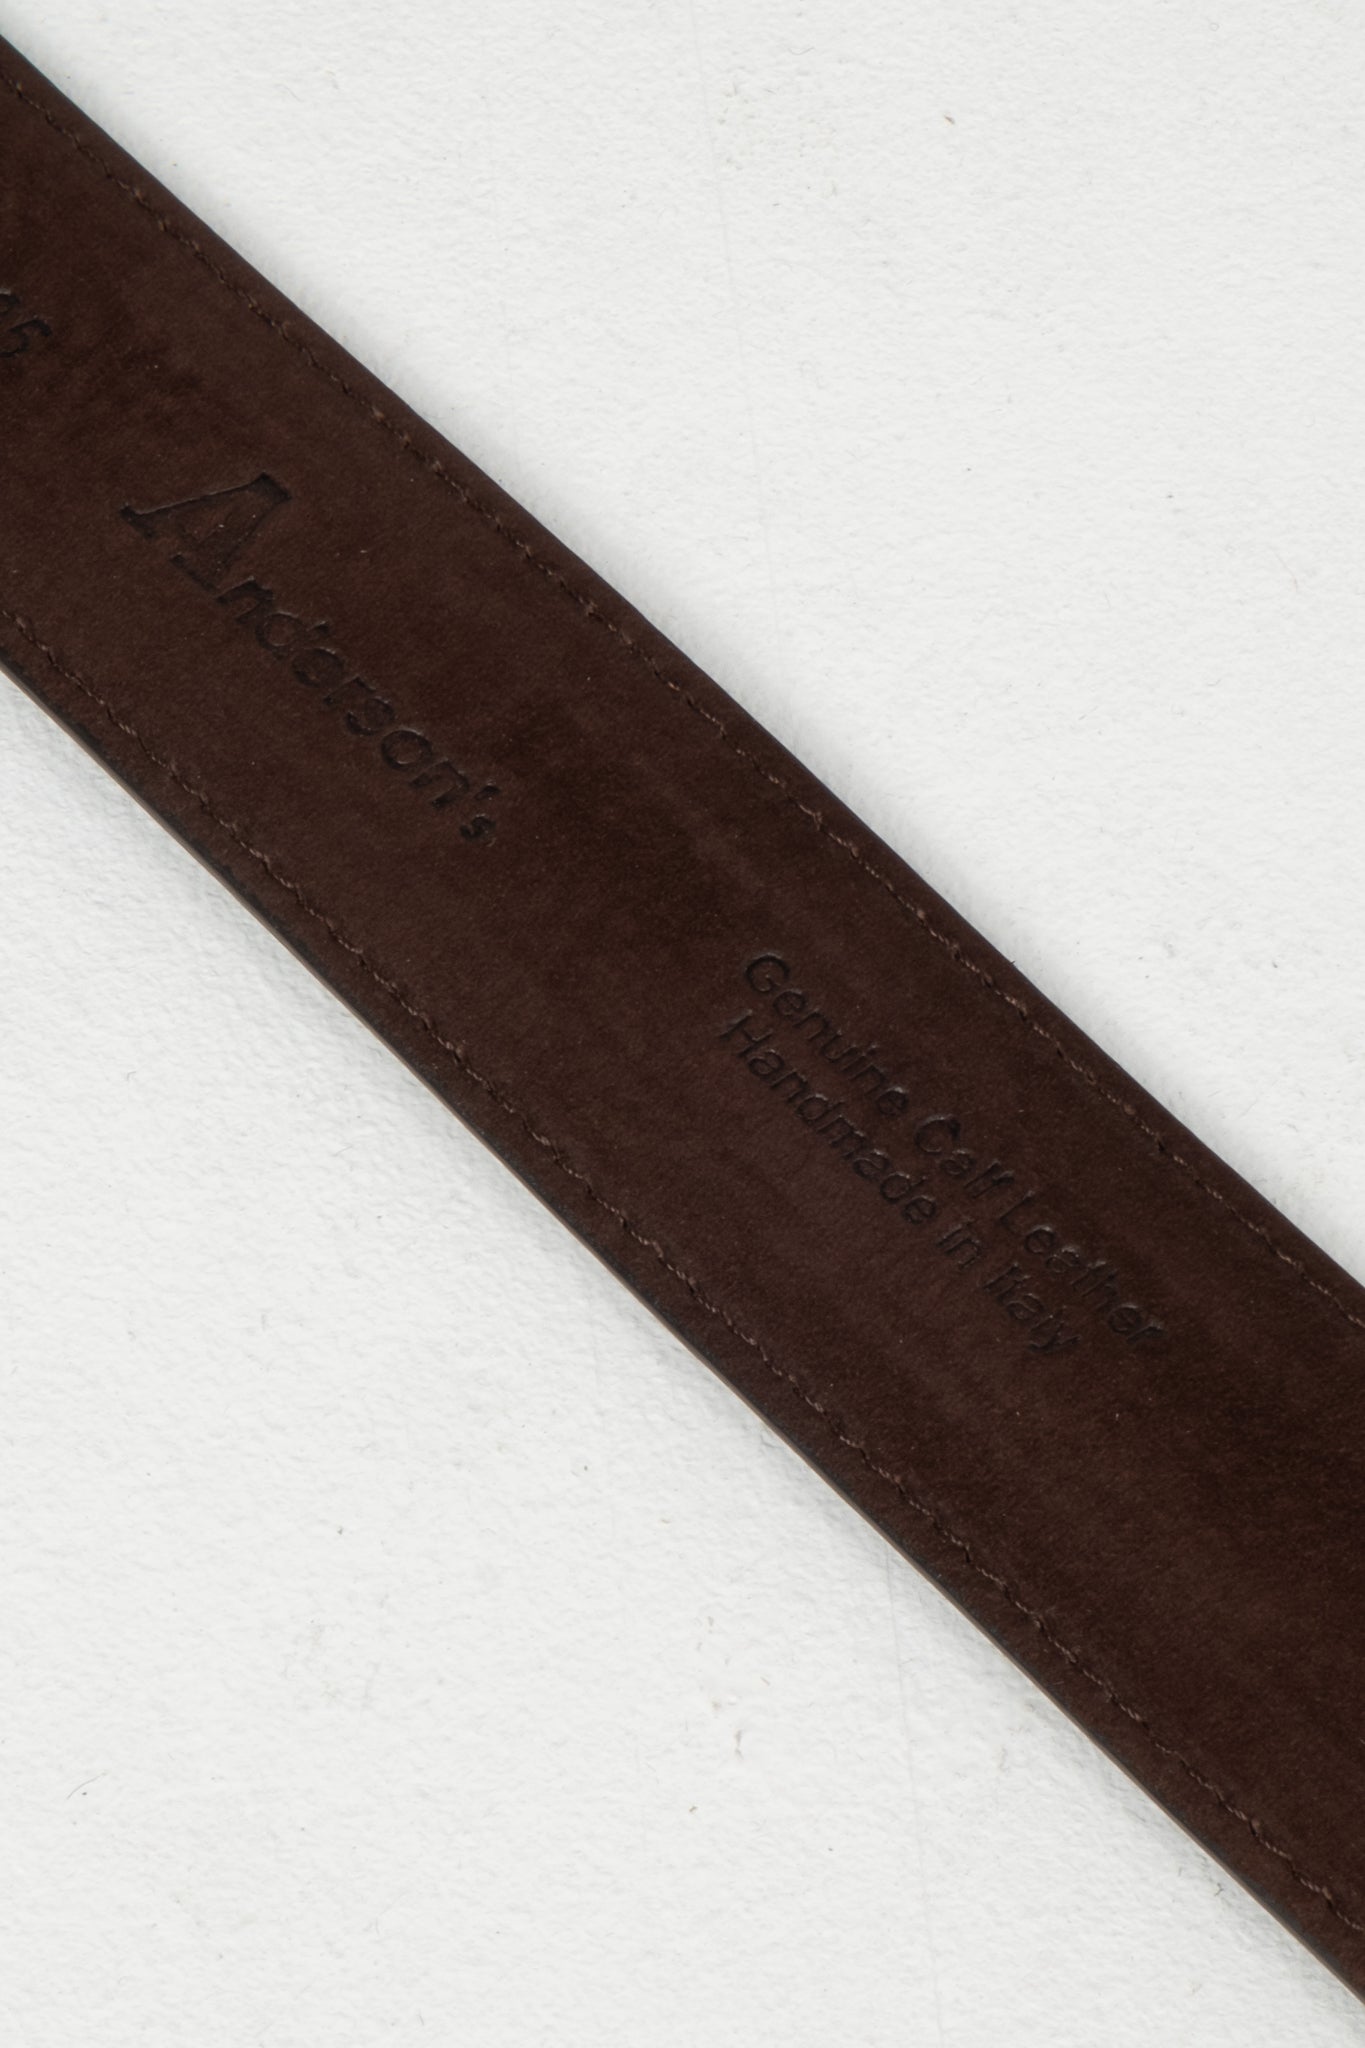 Suede Leather Belt - Brown